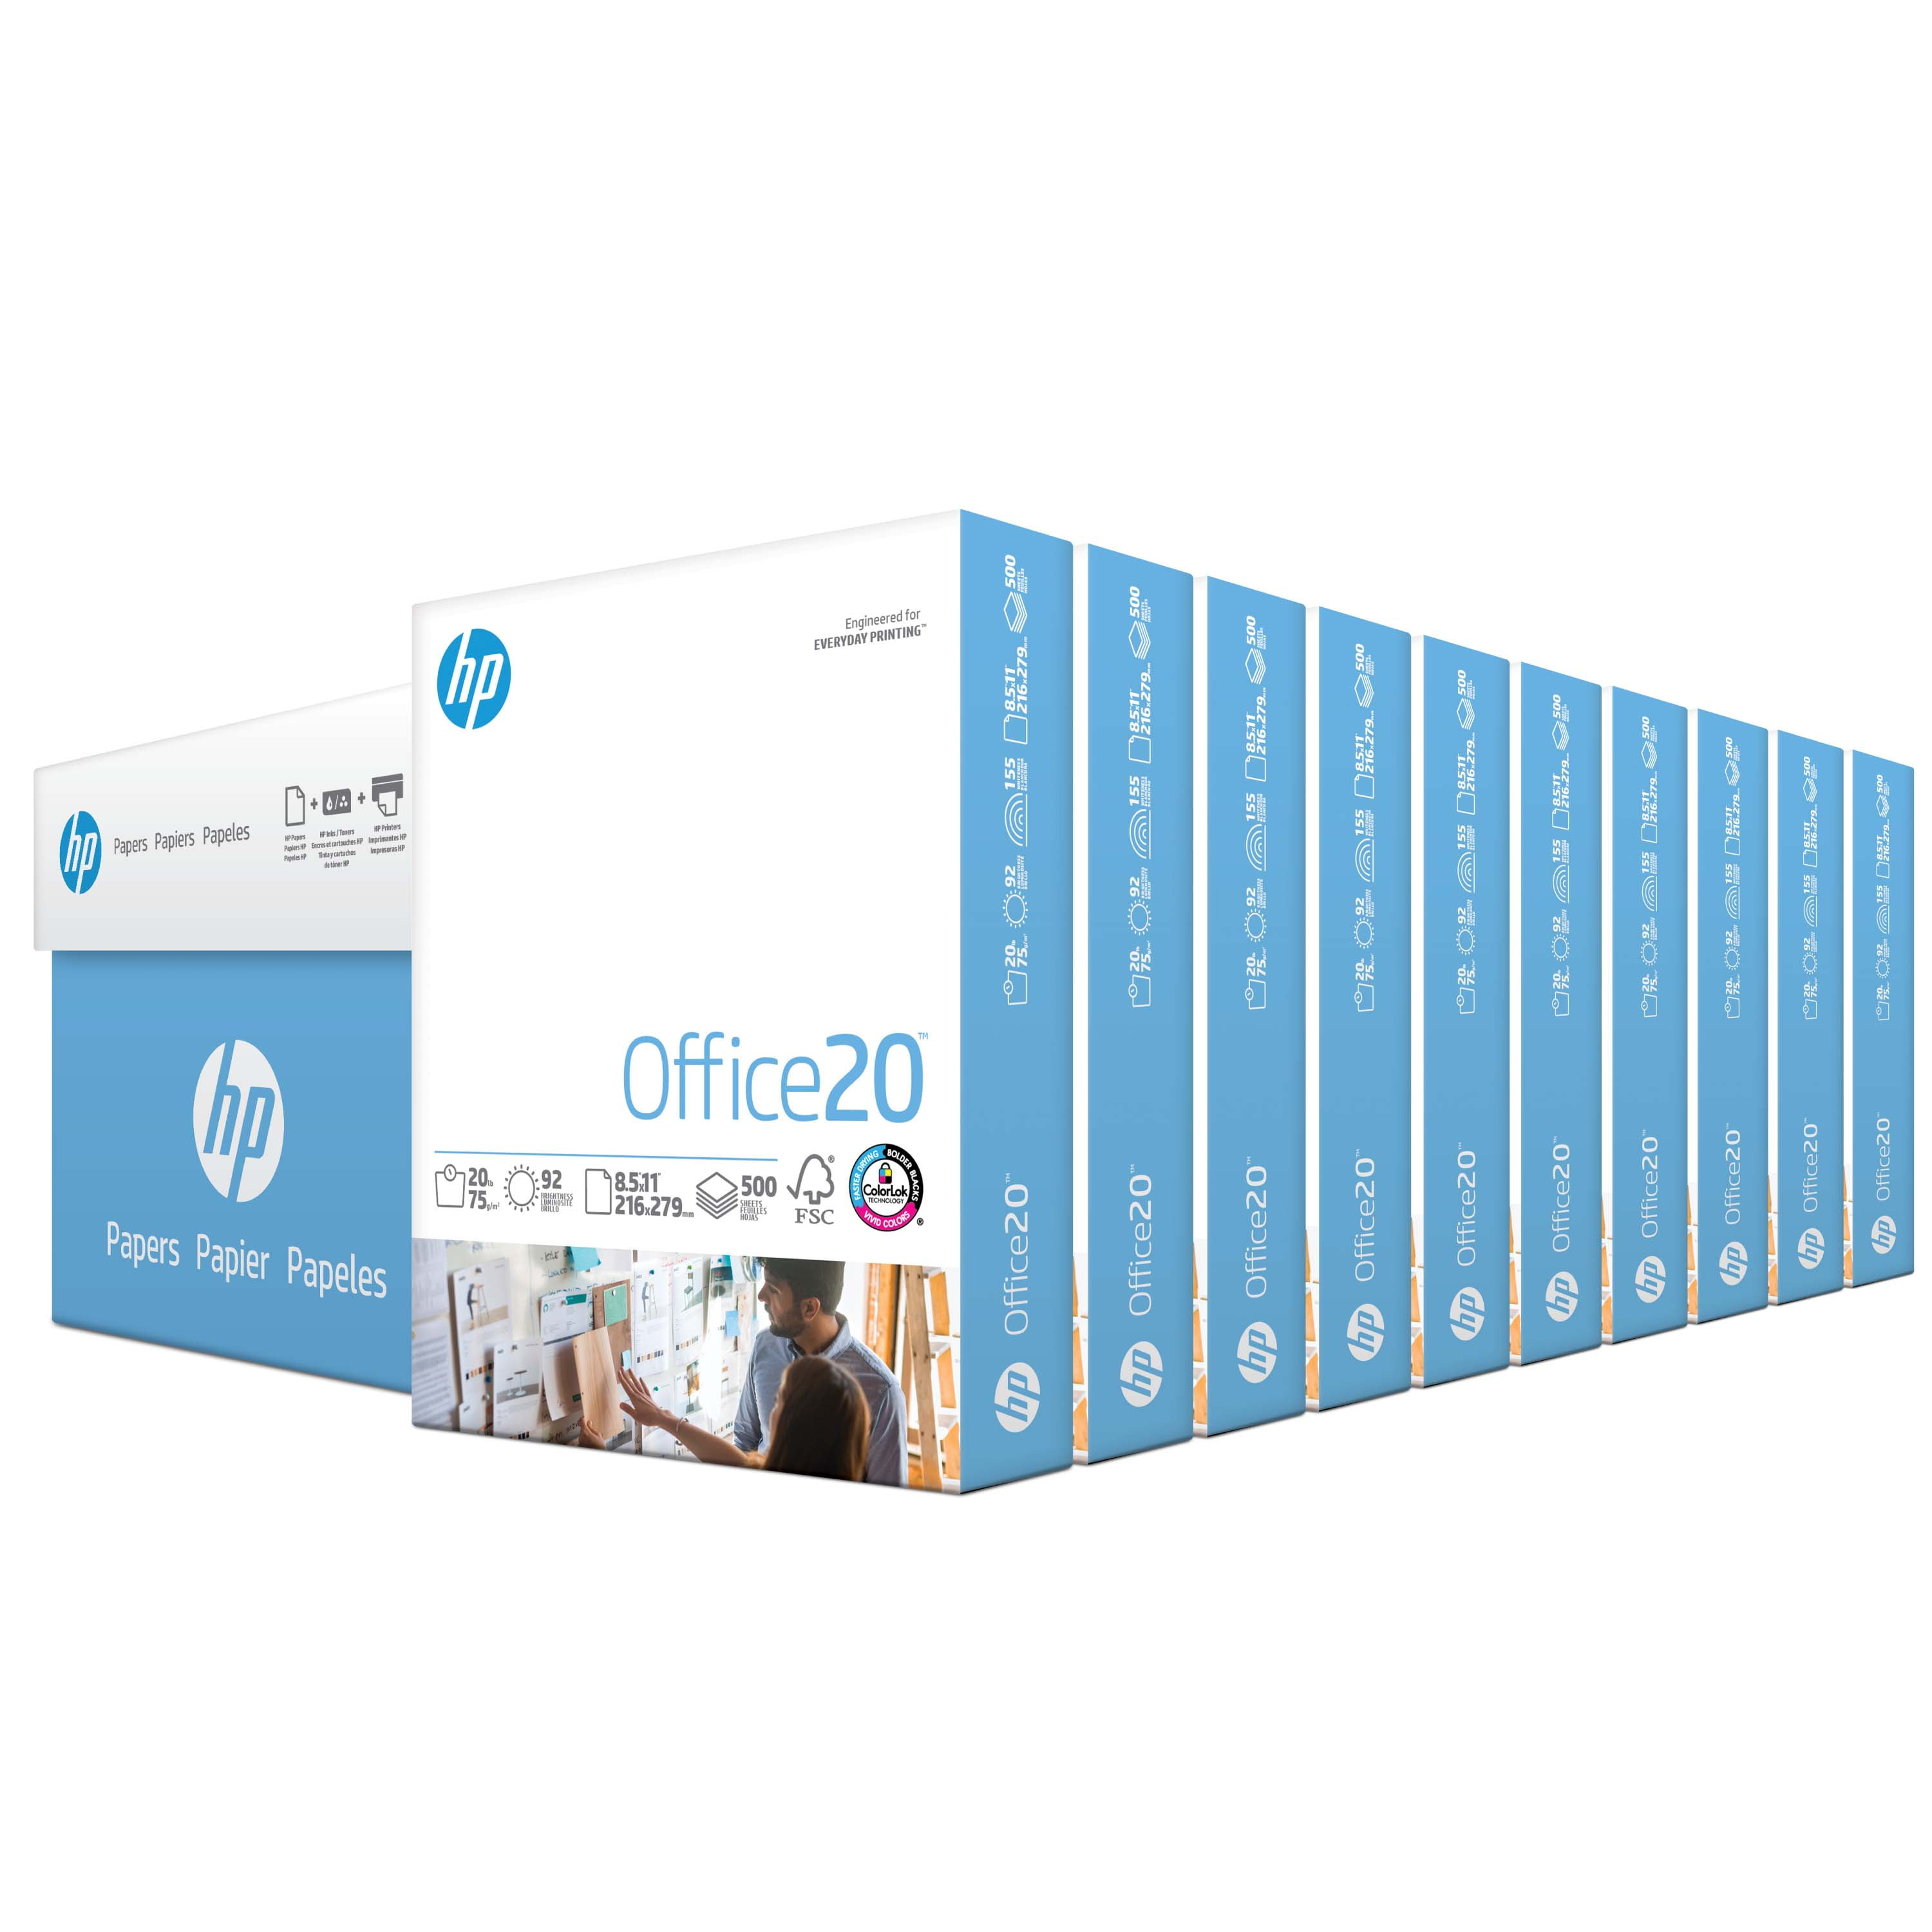 HP 112530 500 Sheets Bright Copy Paper White for sale online 